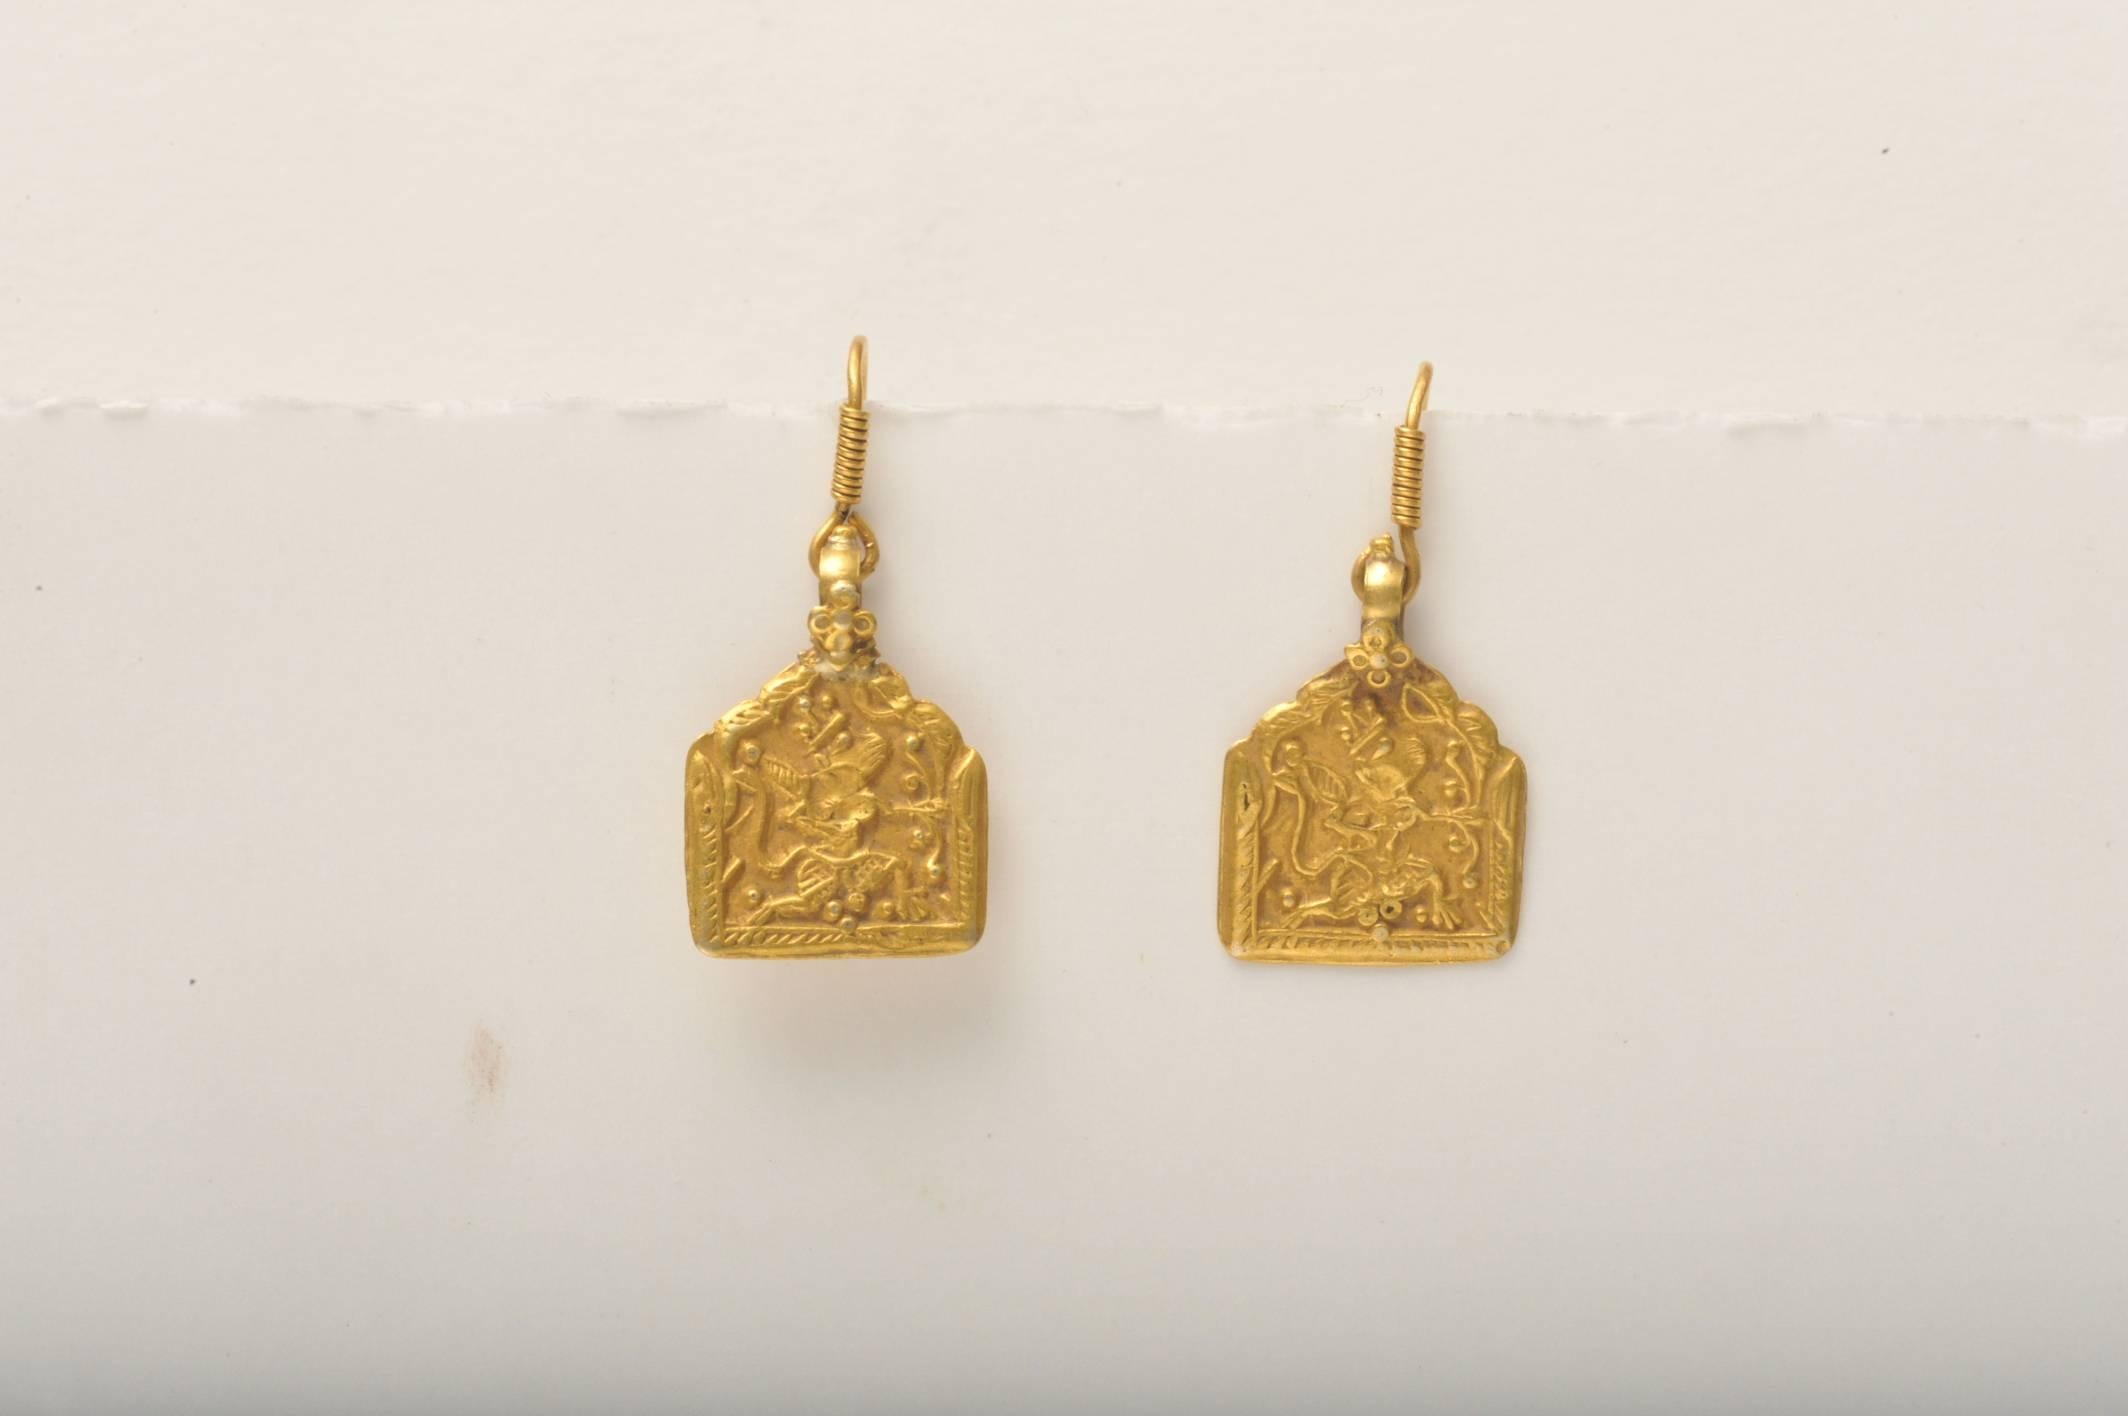 Pair of antique 22K gold Indian jewelry earring pendants depicting Lord Hunuman of Indian Mythology.  Nicely hand-tooled work and French wires added later, for pierced ears.